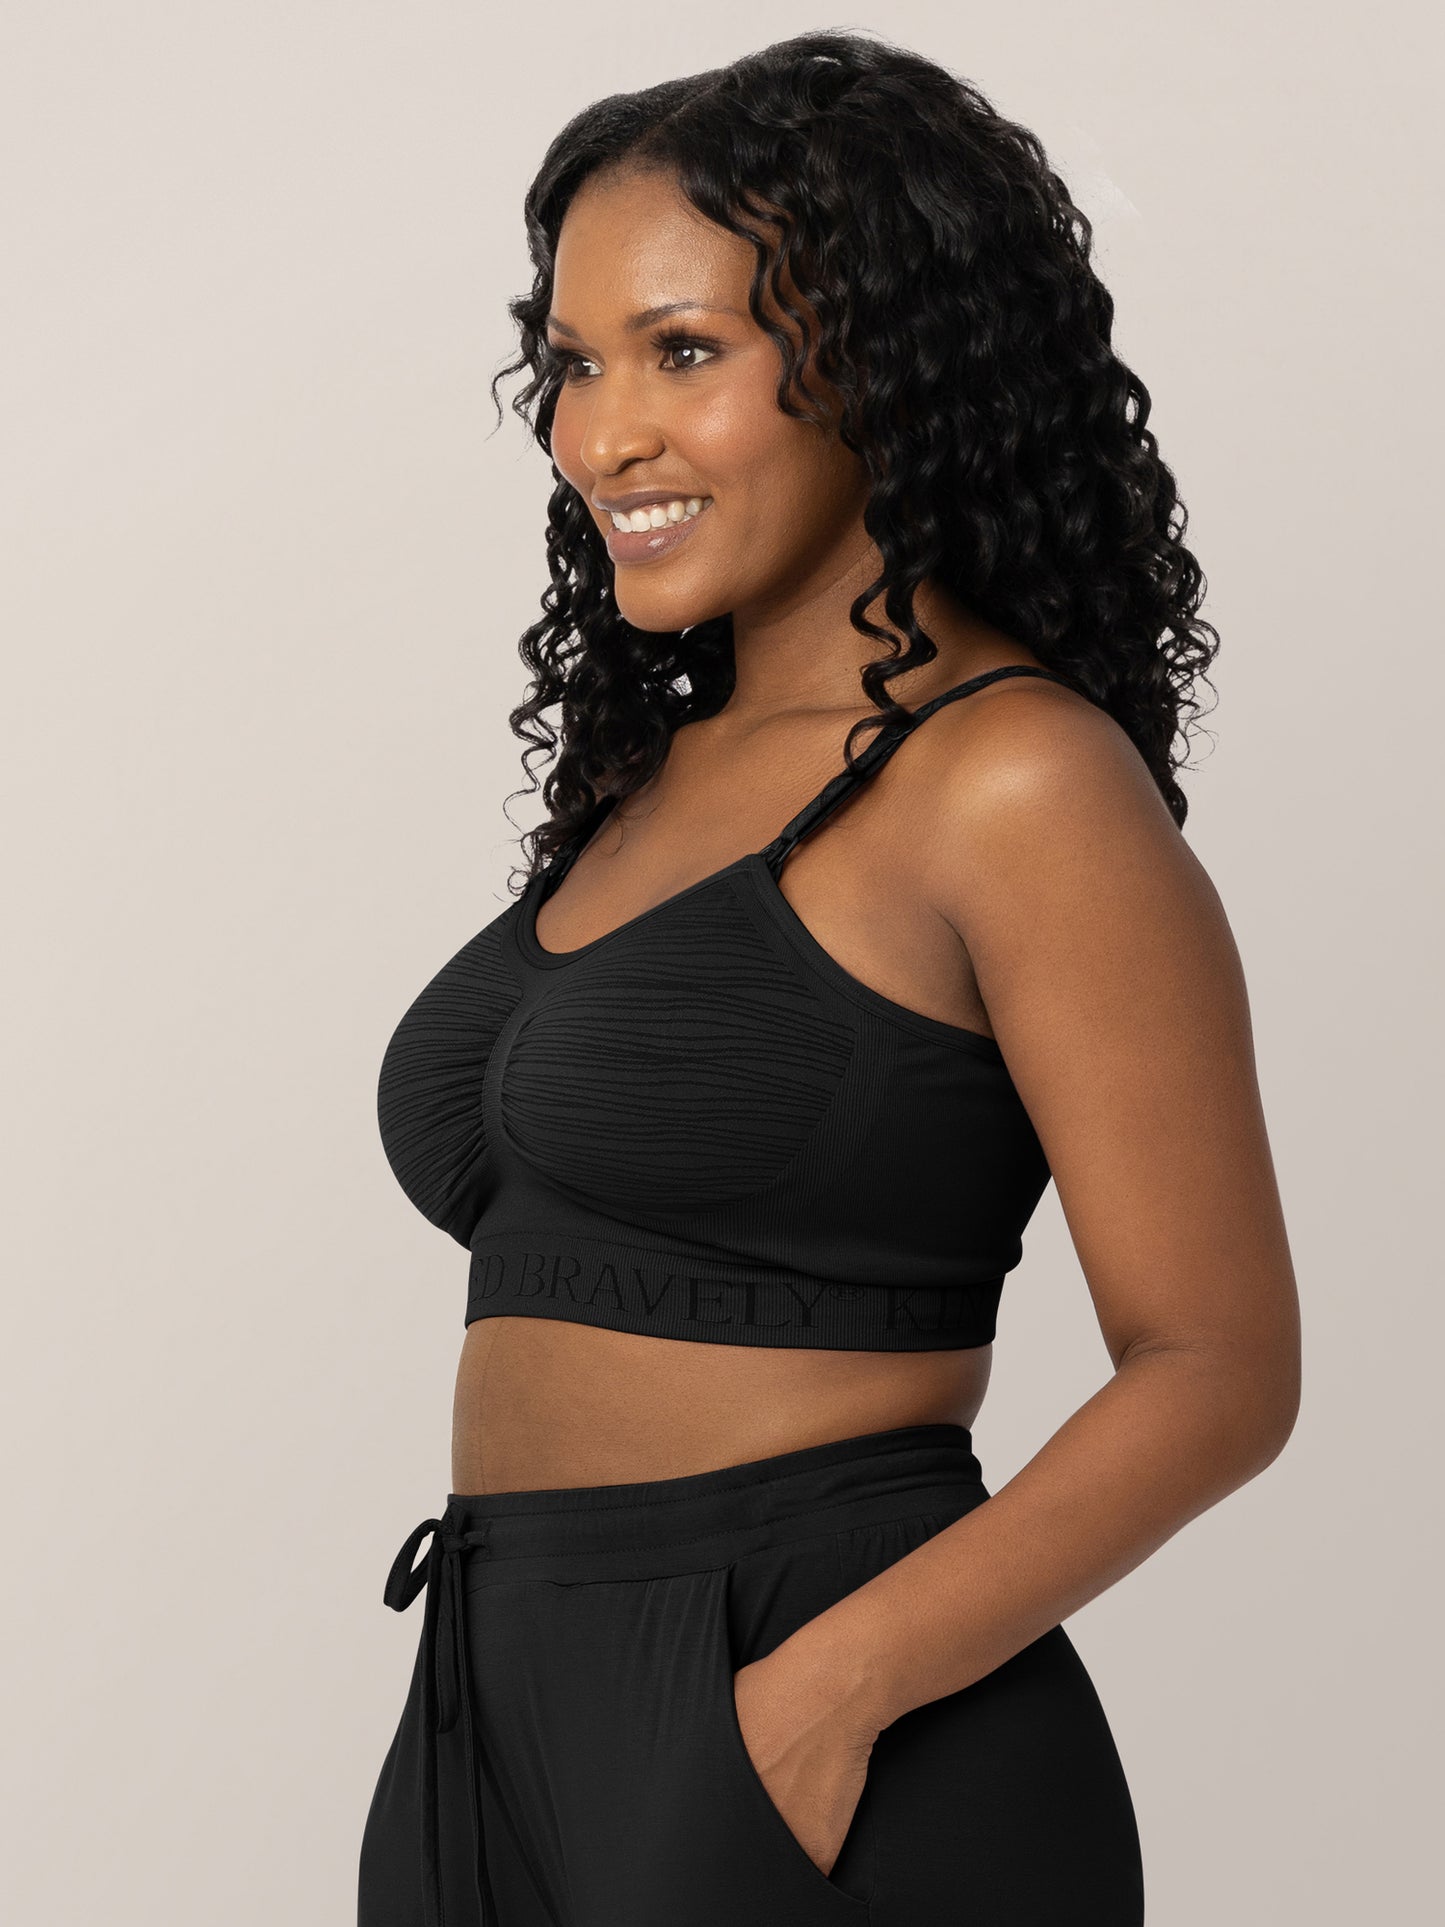 Three-quarters shot of a model wearing the Sublime® Hands-Free Pumping & Nursing Bra in Black